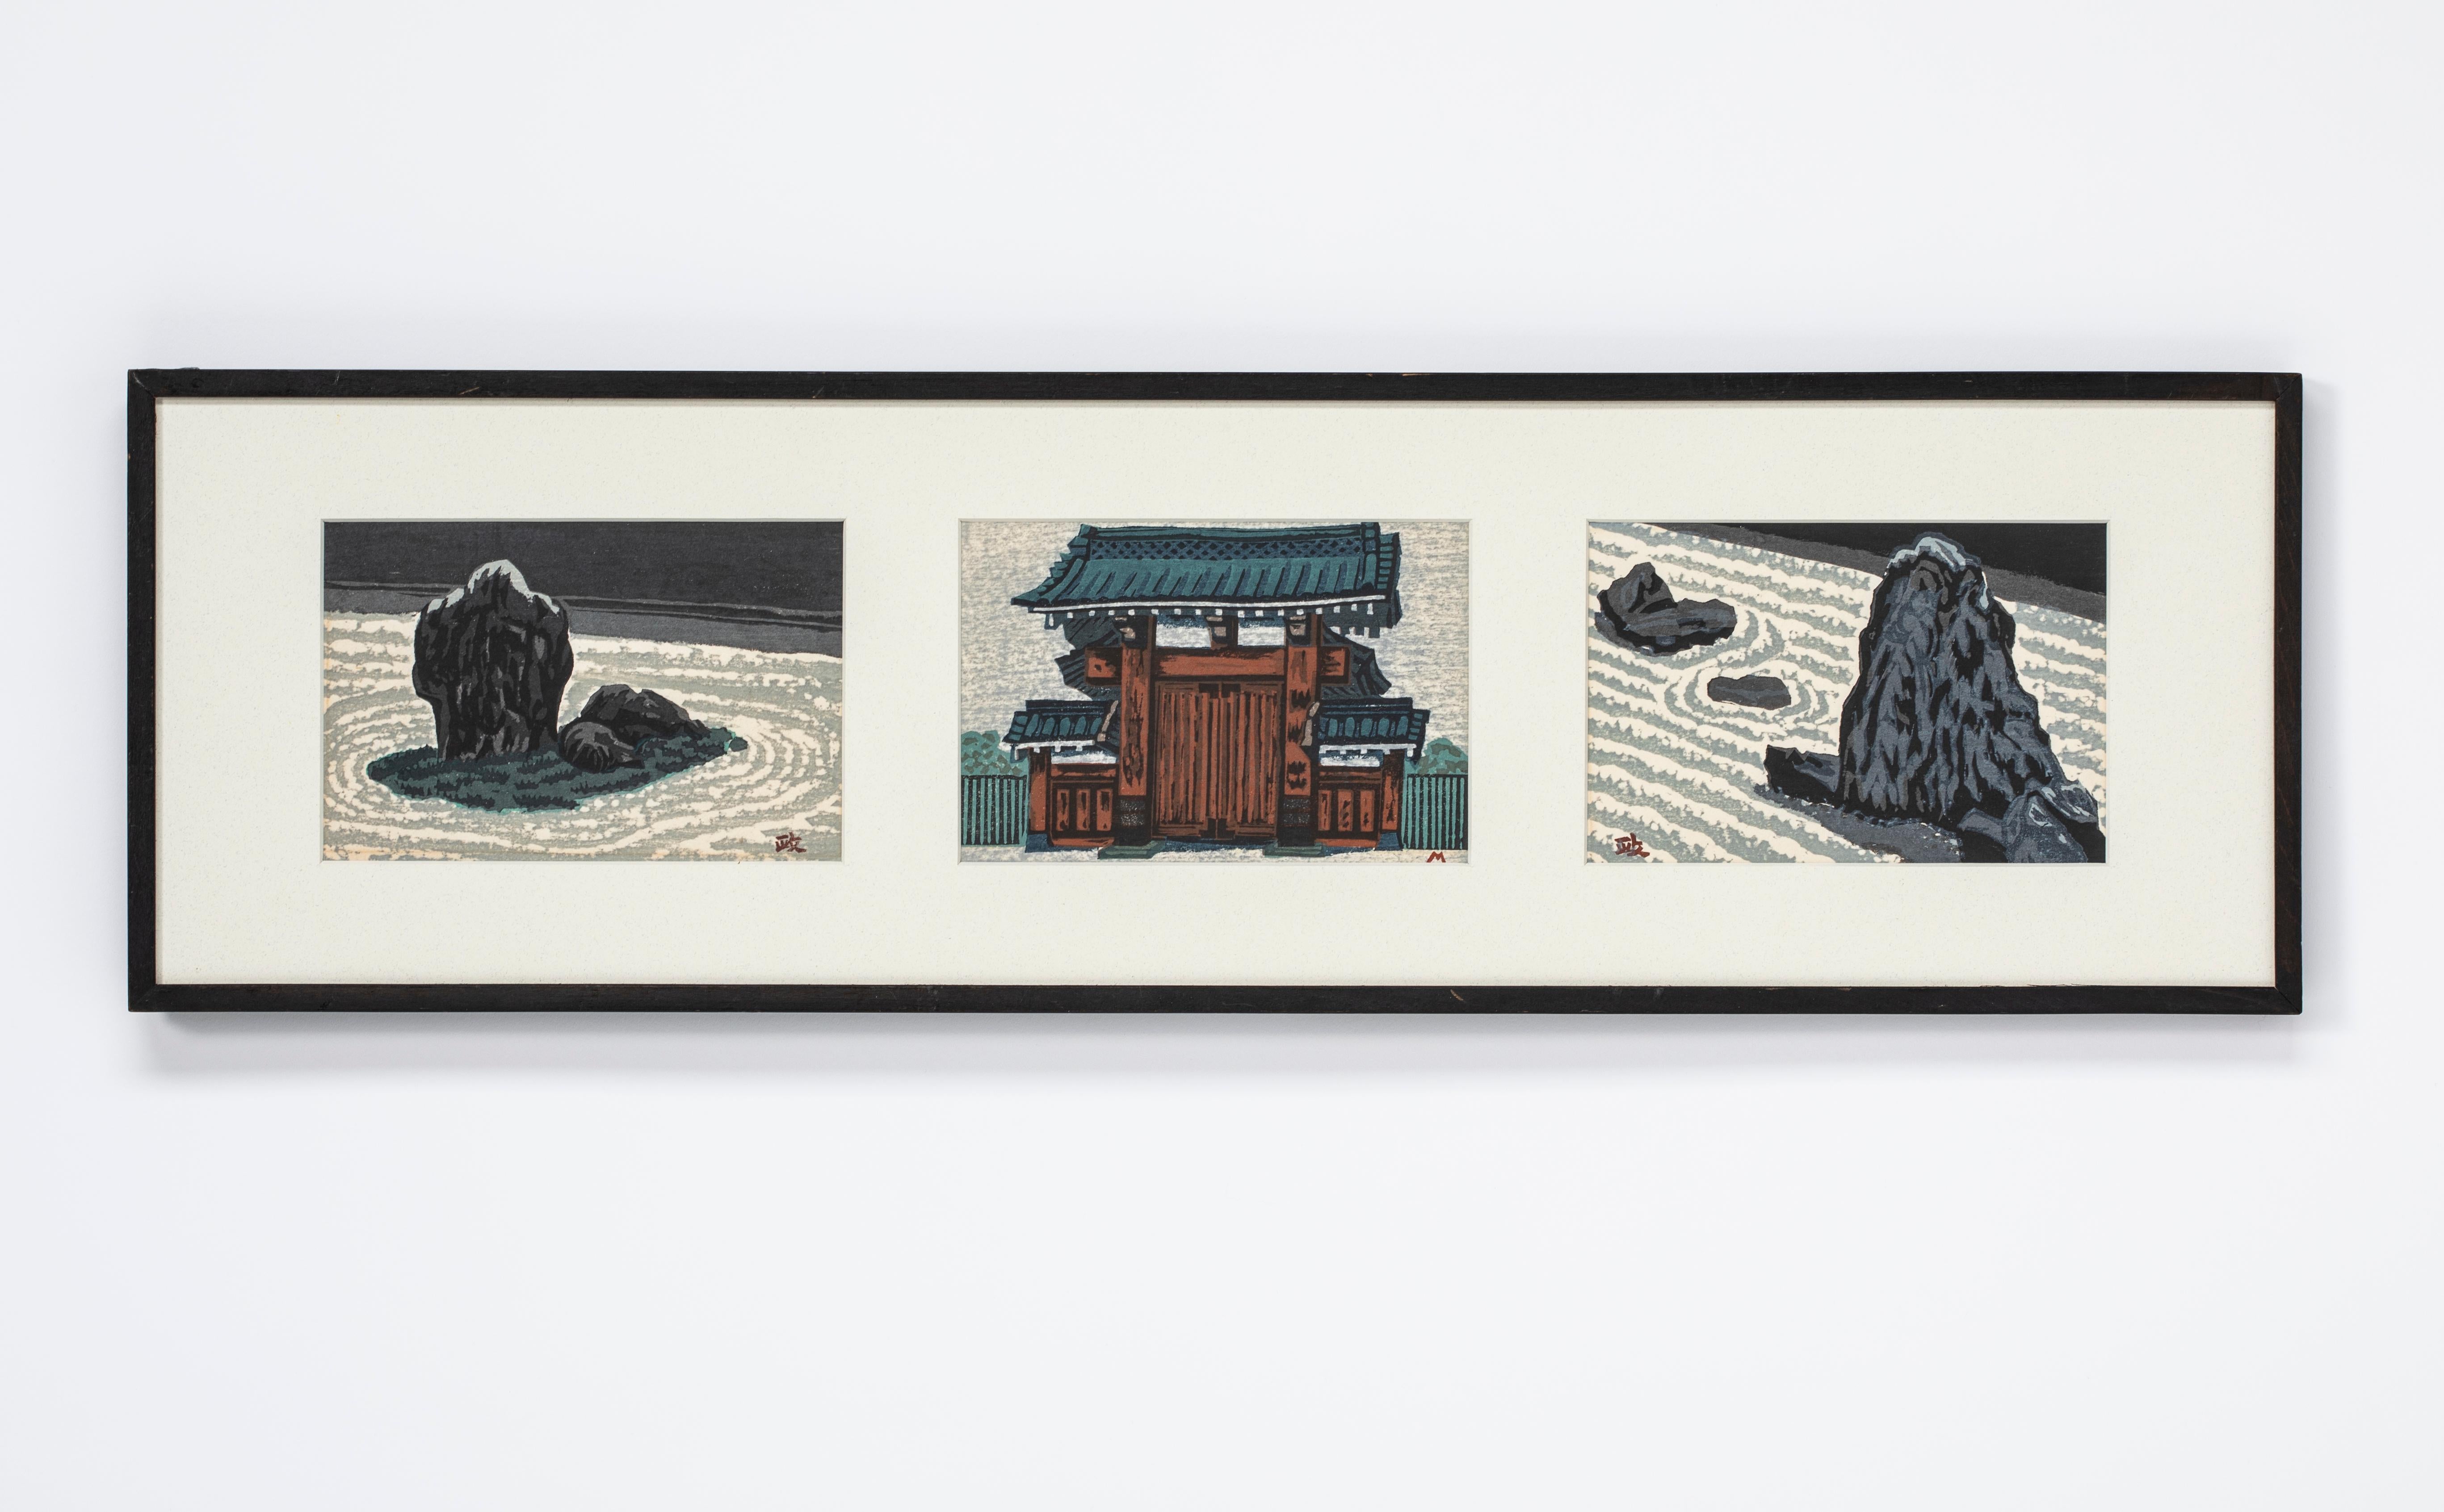 Triptych of Rock Gardens and Japanese Gates Woodblocks by Masao Maeda
These three Scenes depict his respect for Rock Gardens with carefully raked Scenes and Japanese Gates.
Masao Maeda Japanese Artist (1904-1974)
Born in Hakodate on the island of